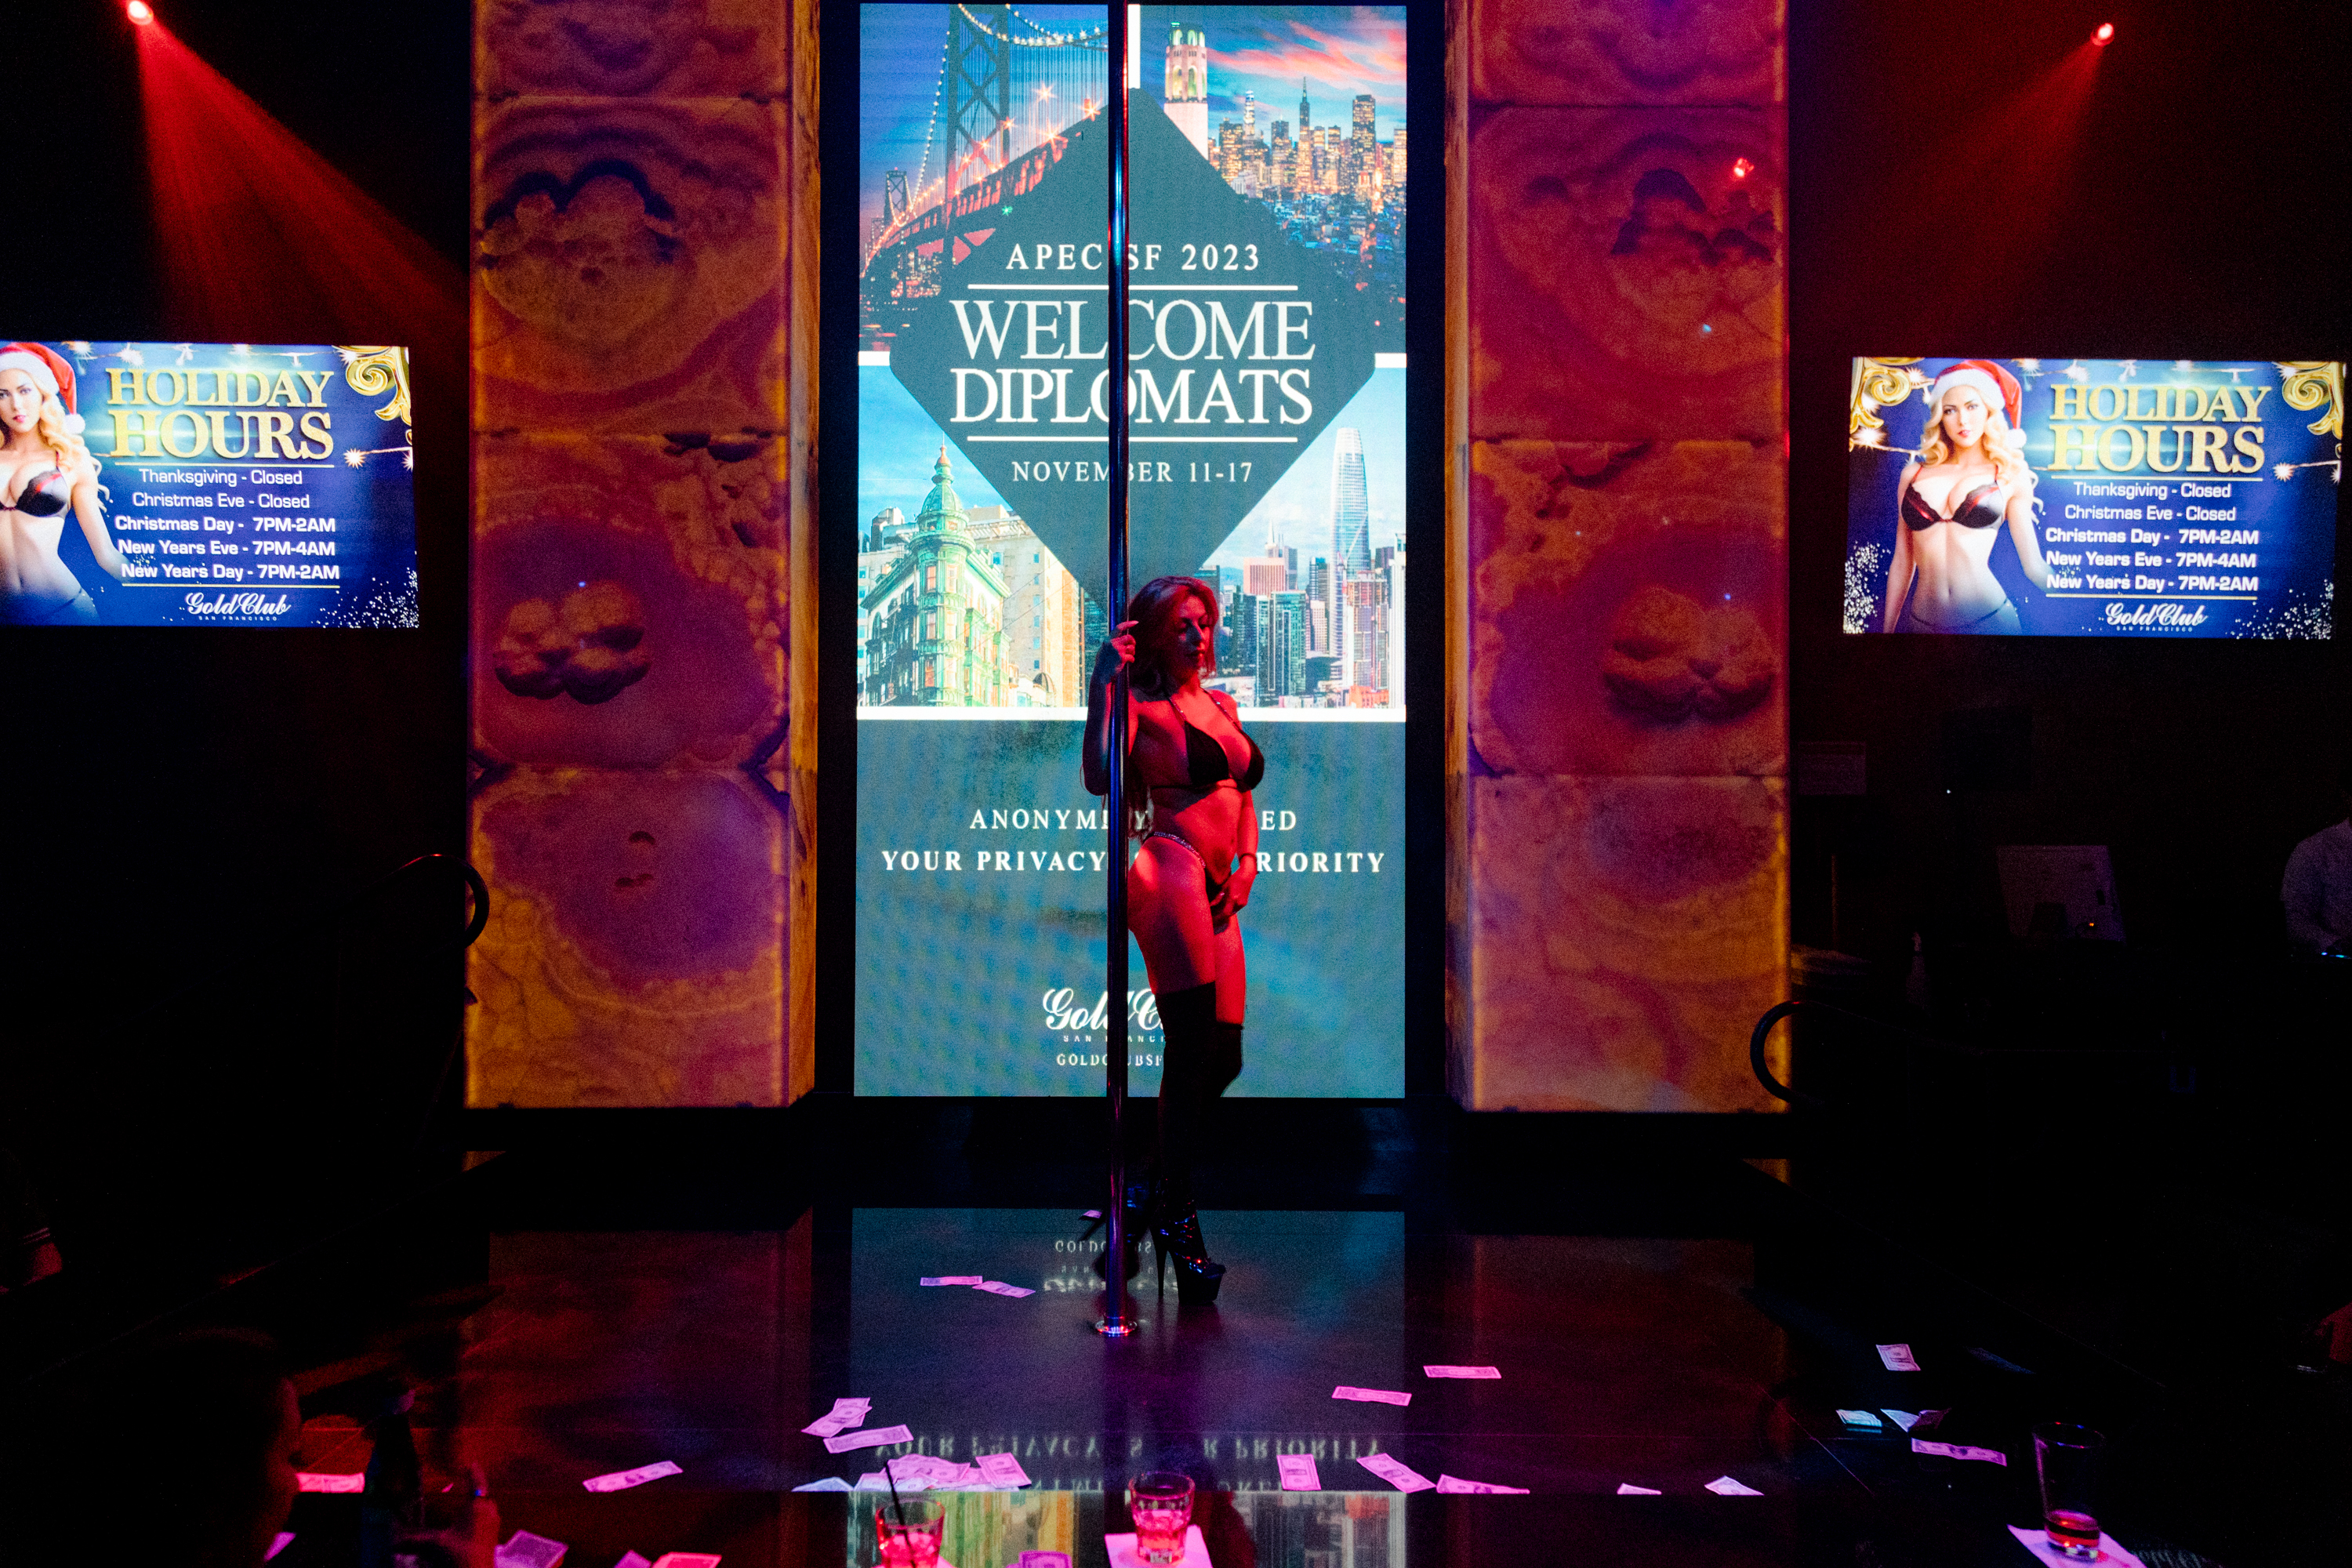 An exotic dancers stands in the middle of the dance floor with dollar bills on the ground and a LCD screen that reads &quot;Welcome Diplomats - APEC SF 2023 - November 11-17&quot;